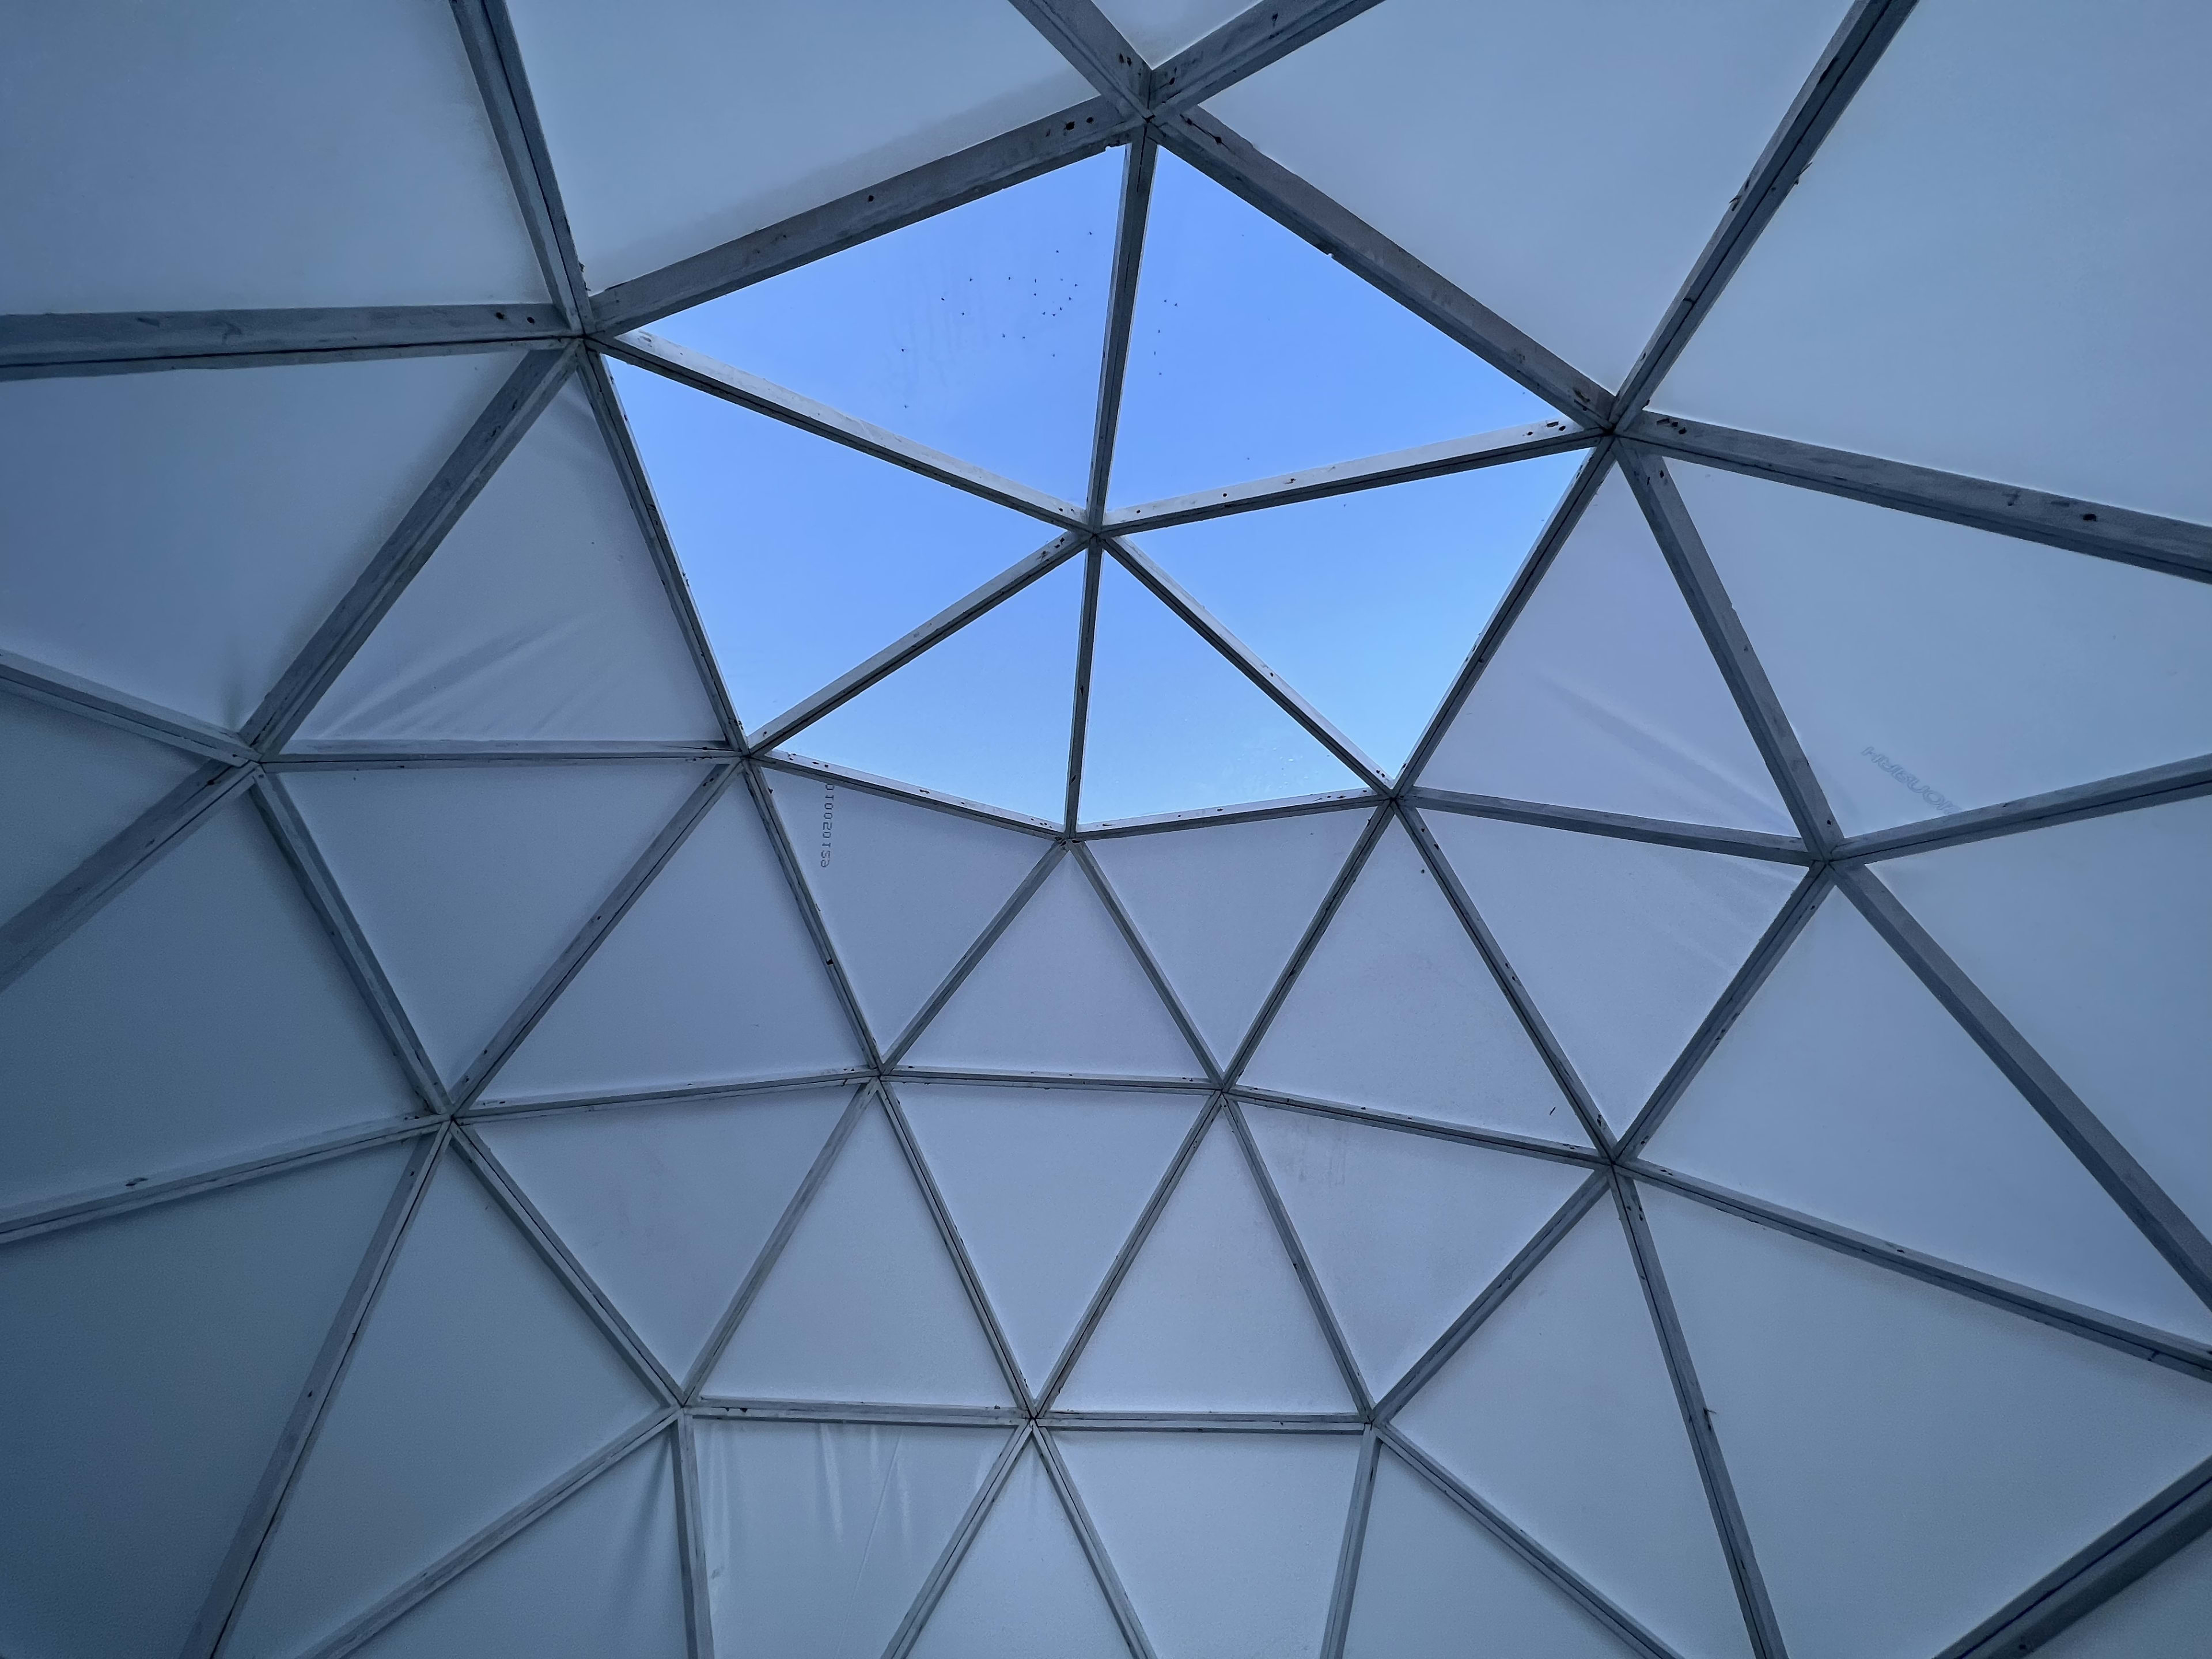 Inside the geodesic dome cabin looking up at the skylight.